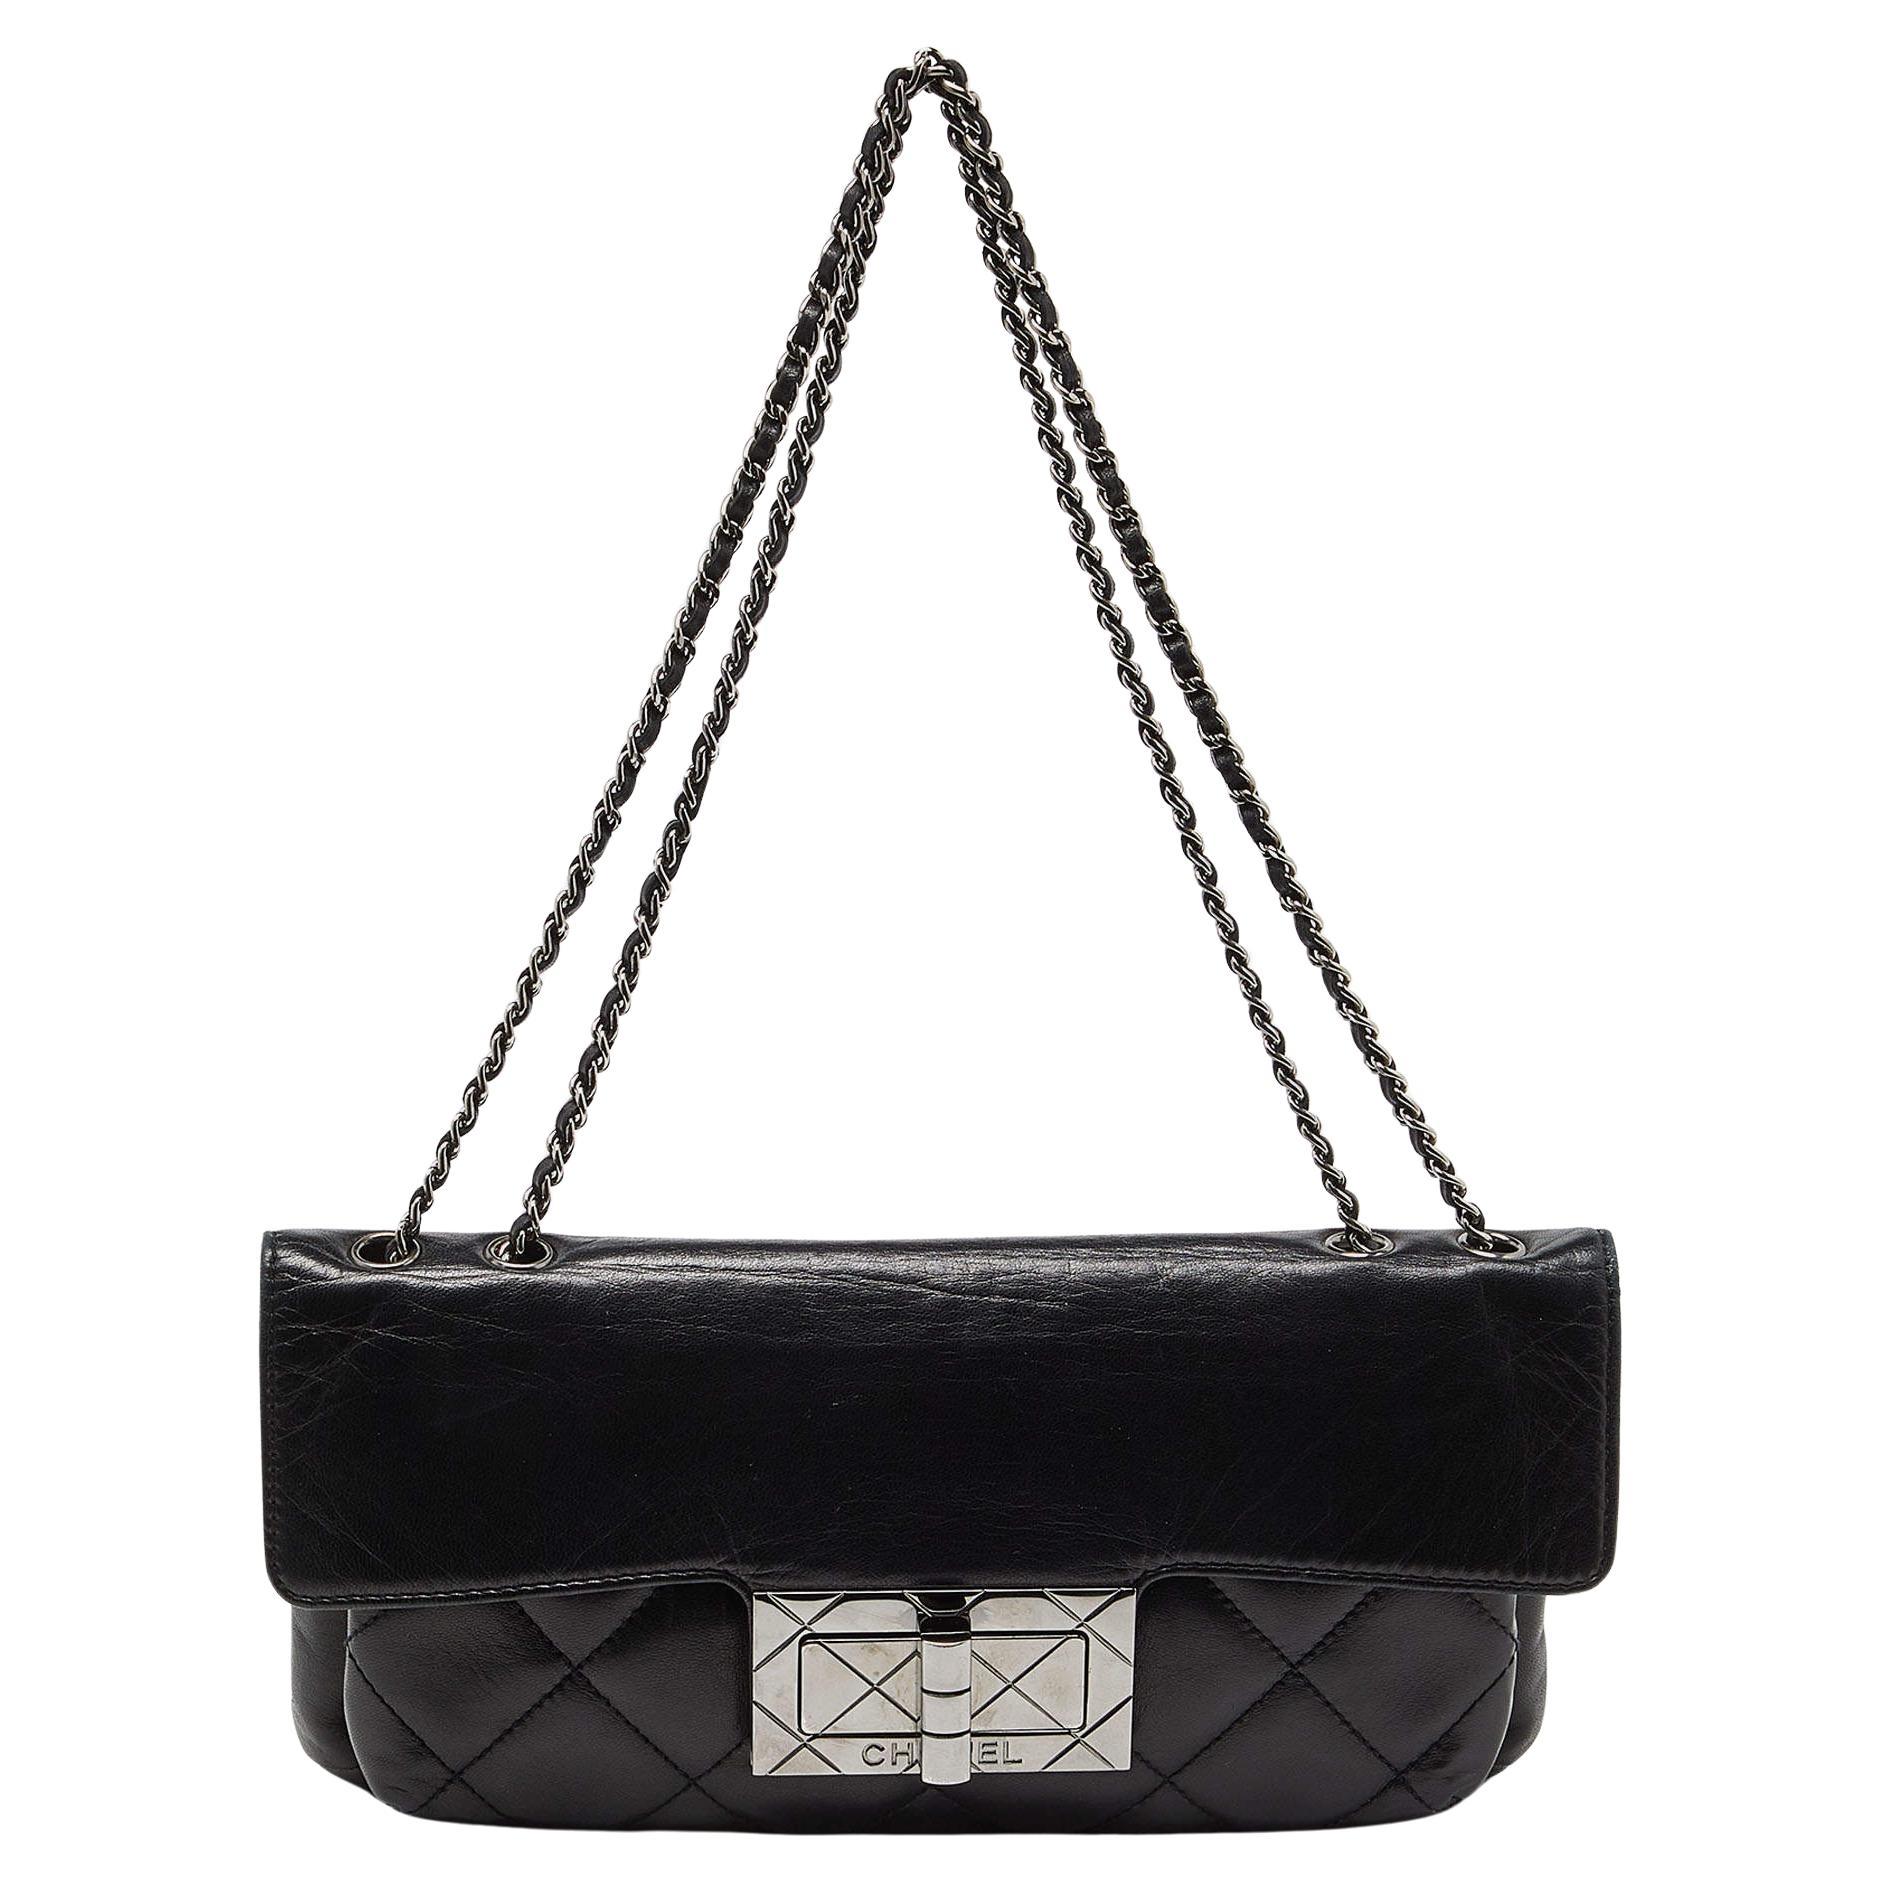 Chanel Black Quilted Leather Reissue Flap Bag For Sale